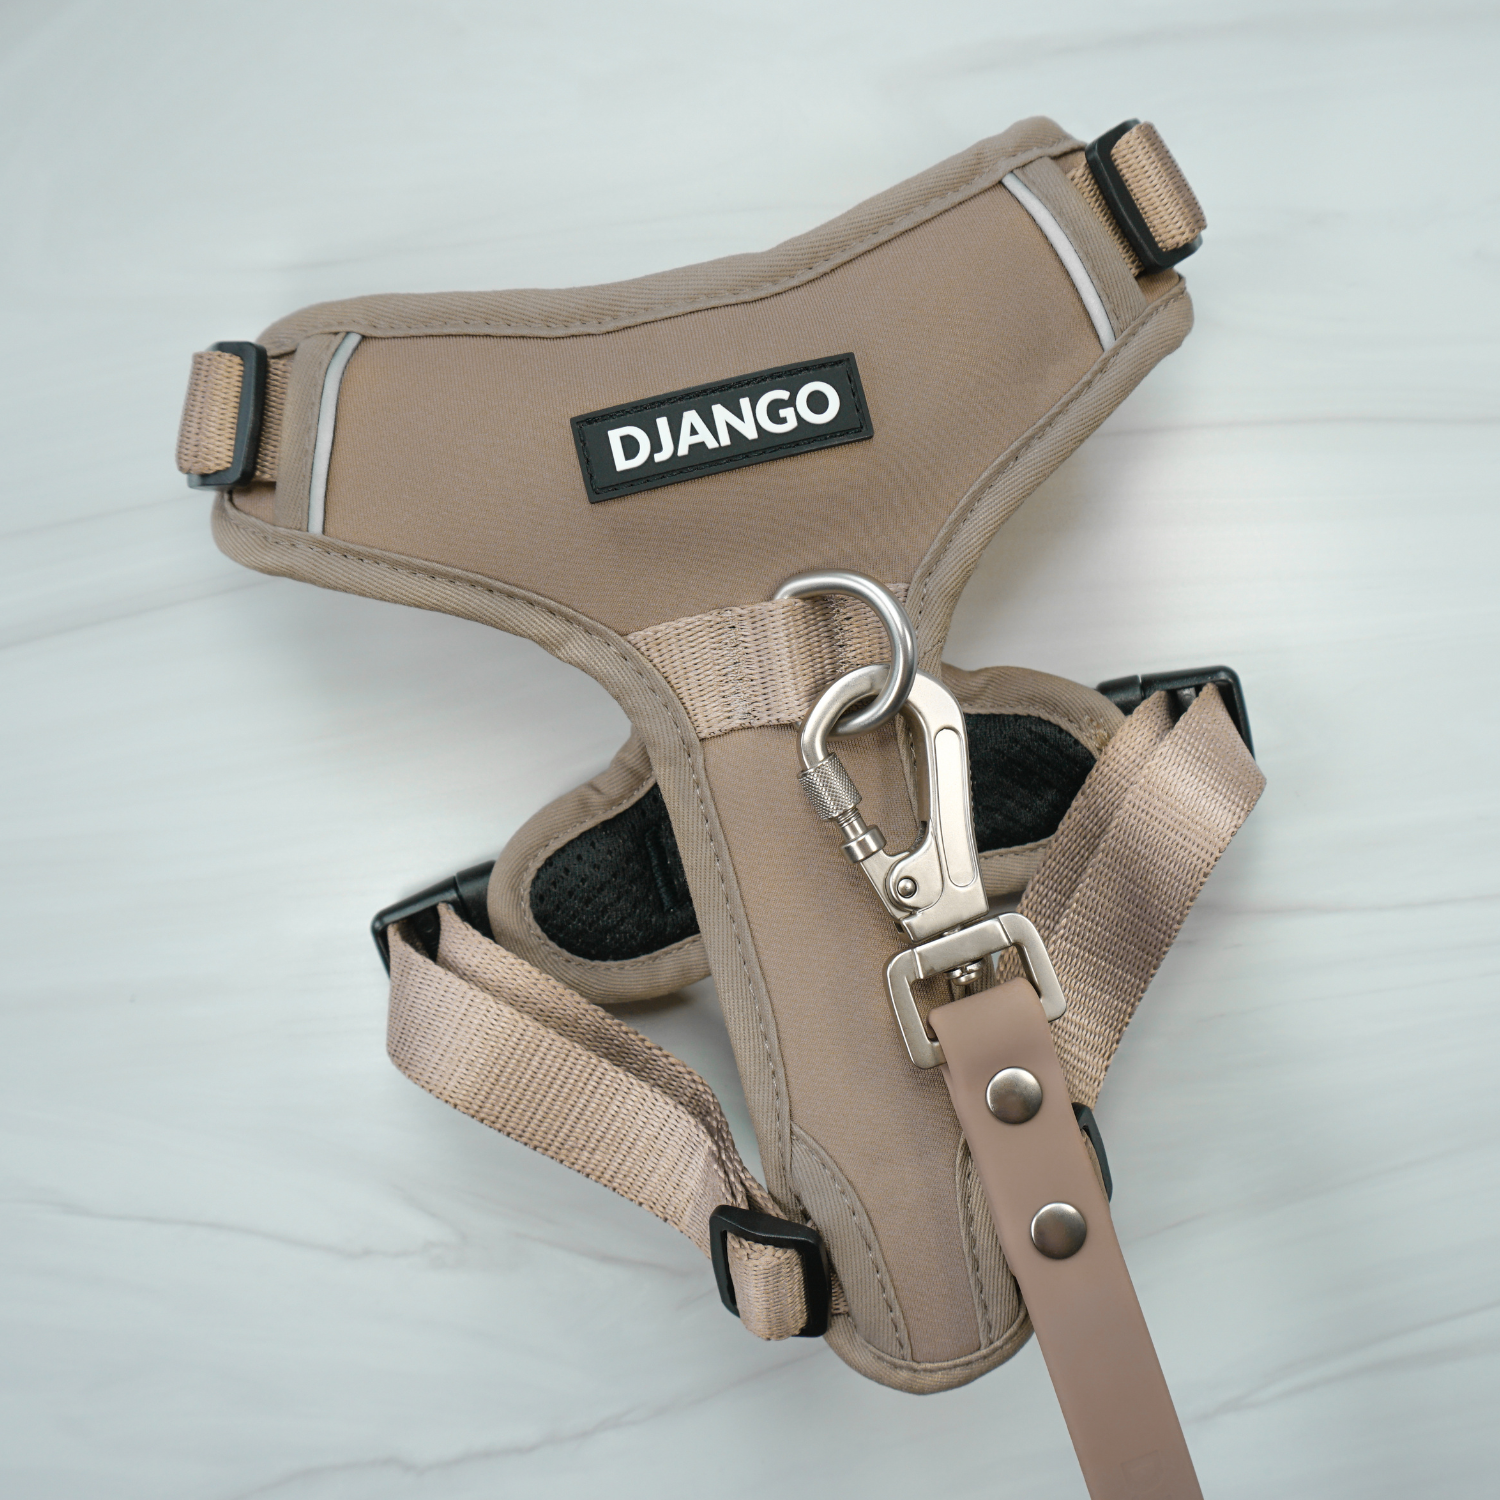 DJANGO Tahoe No Pull Dog Harness - Key features include a weather-resistant and padded neoprene exterior, a narrow and deep harness body (to prevent the risk of chafing) reflective piping, and soft webbing. Maisey is a miniature poodle and bichon mix and wears size small in all DJANGO dog harnesses. - djangobrand.com